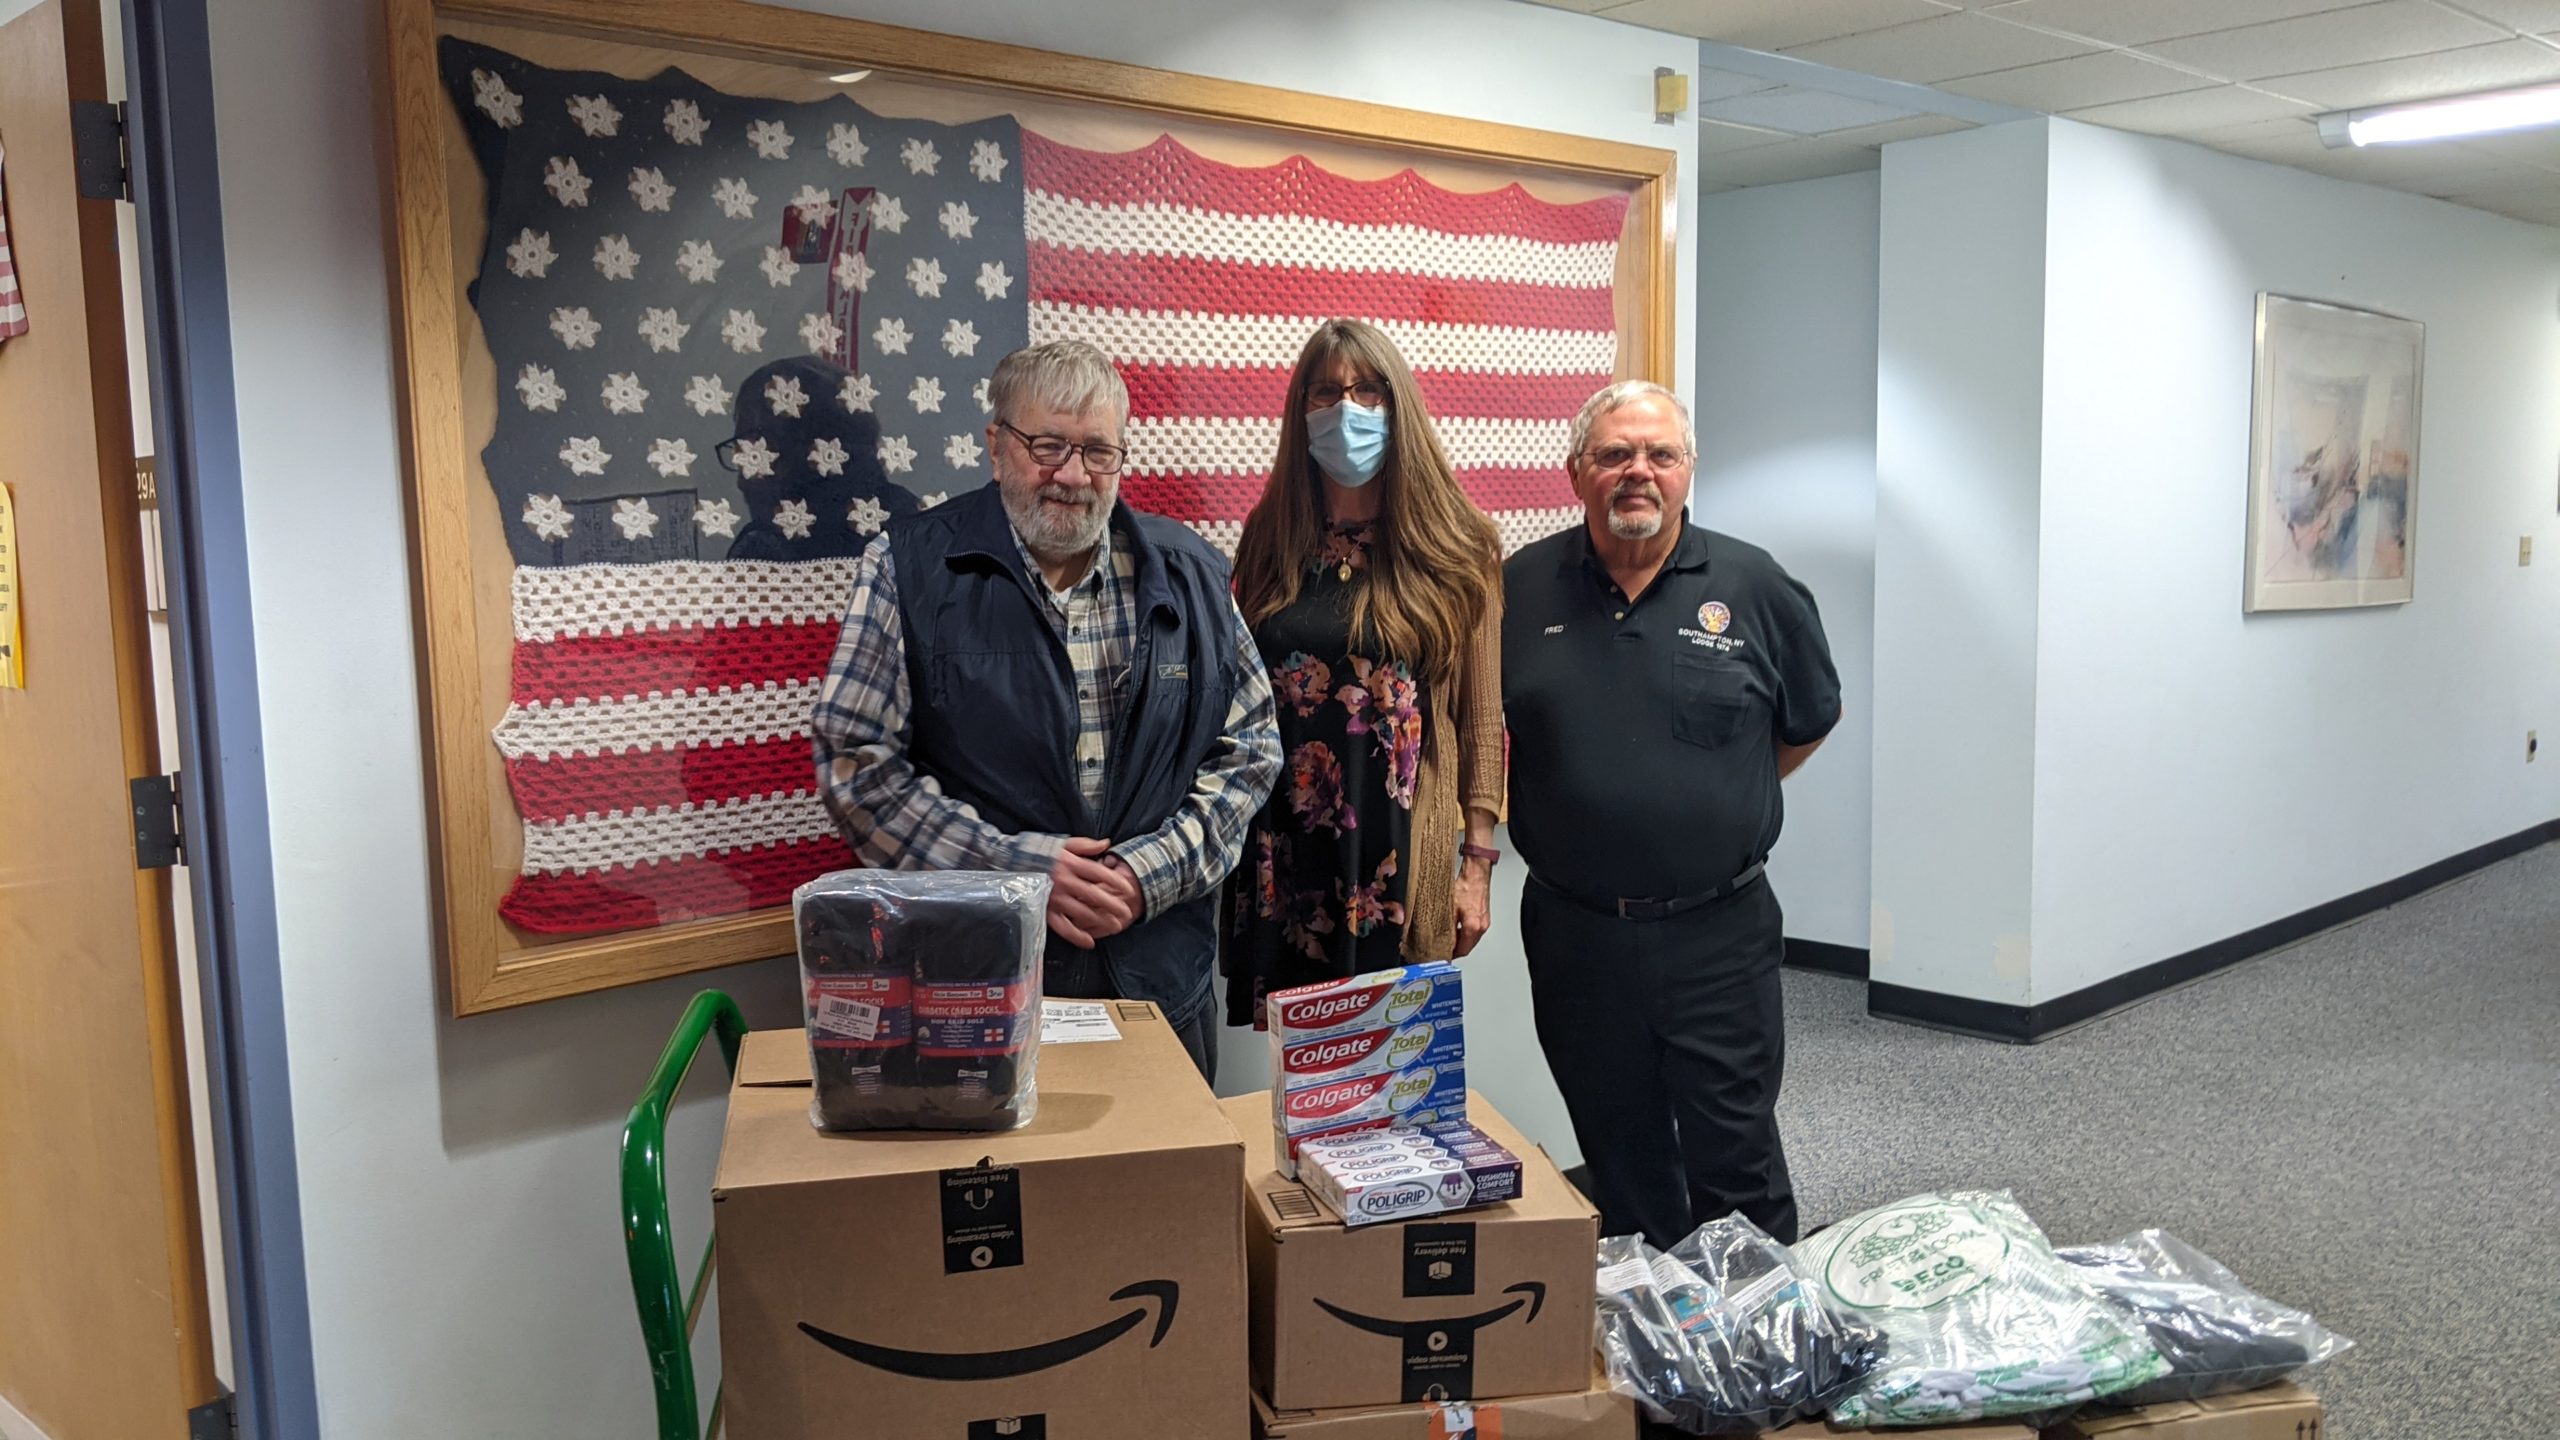 Members of the Southampton Elks Club recently delivered donated goods to the Veterans Administration Hospital in Northport.